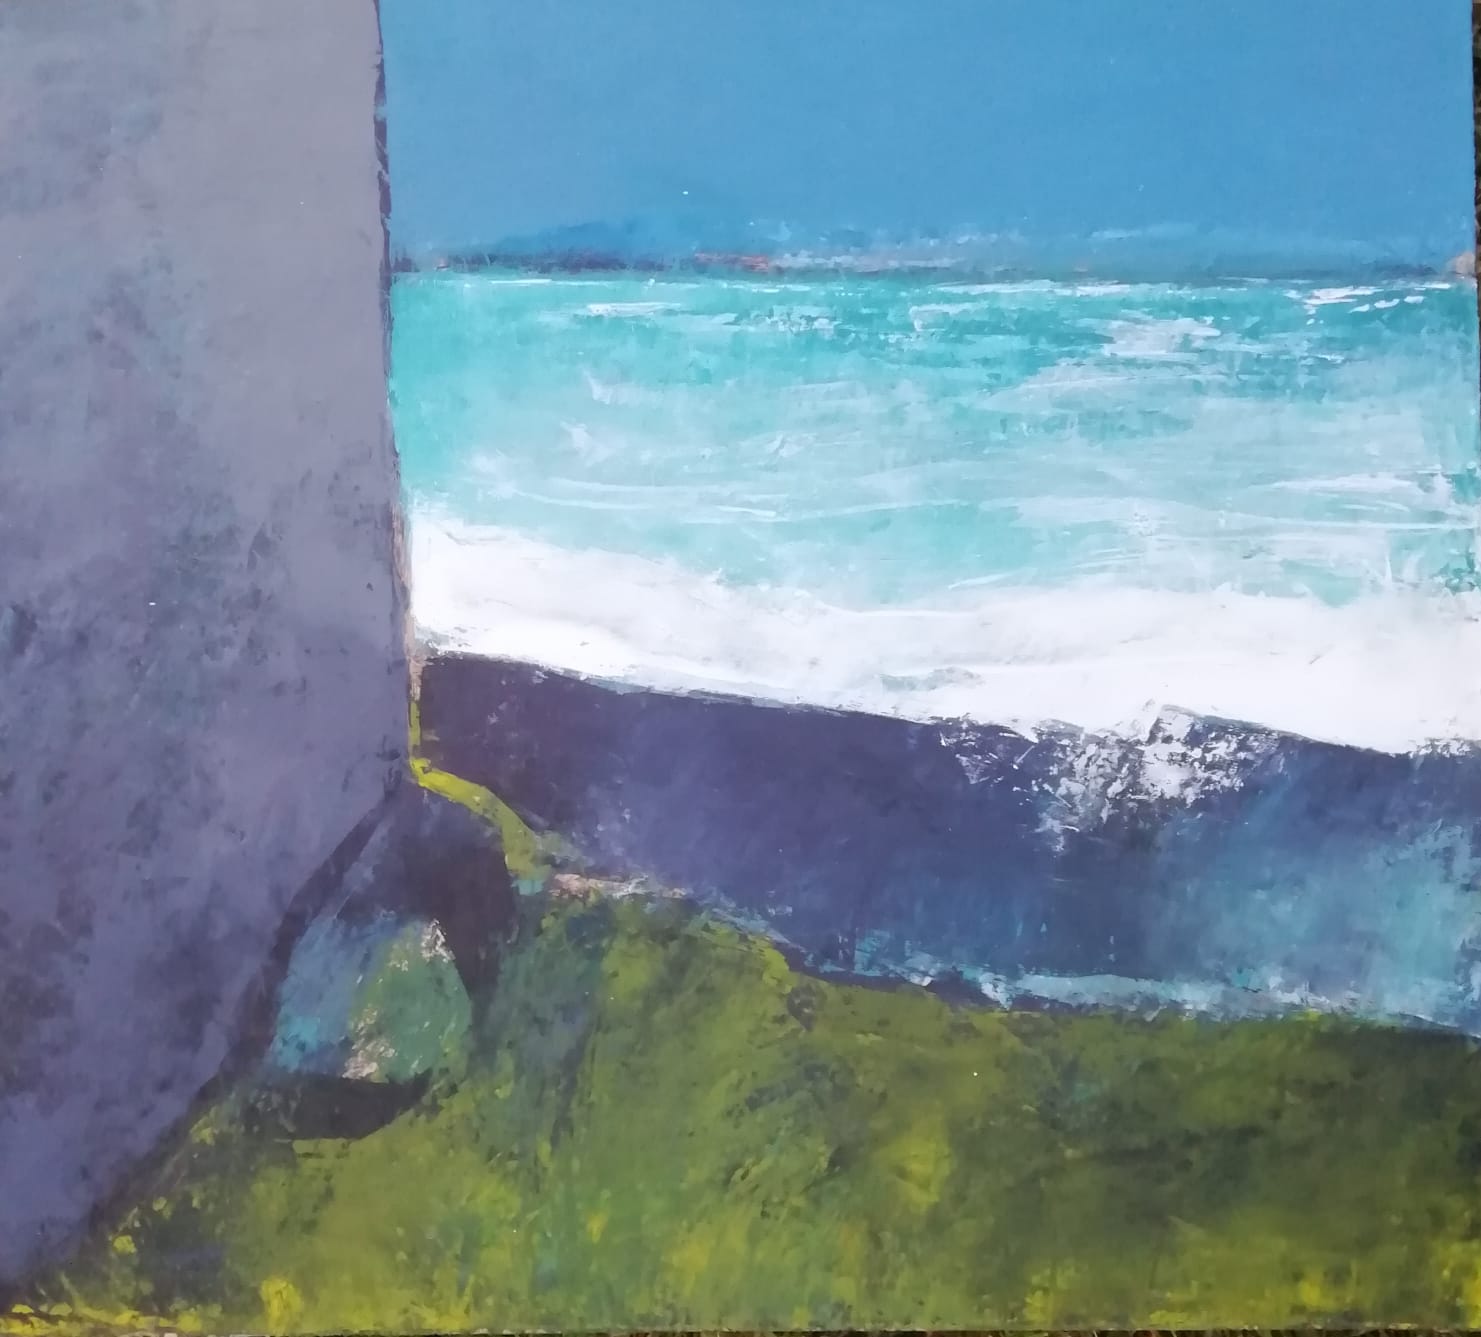 Cormac O'Leary - View from the island I